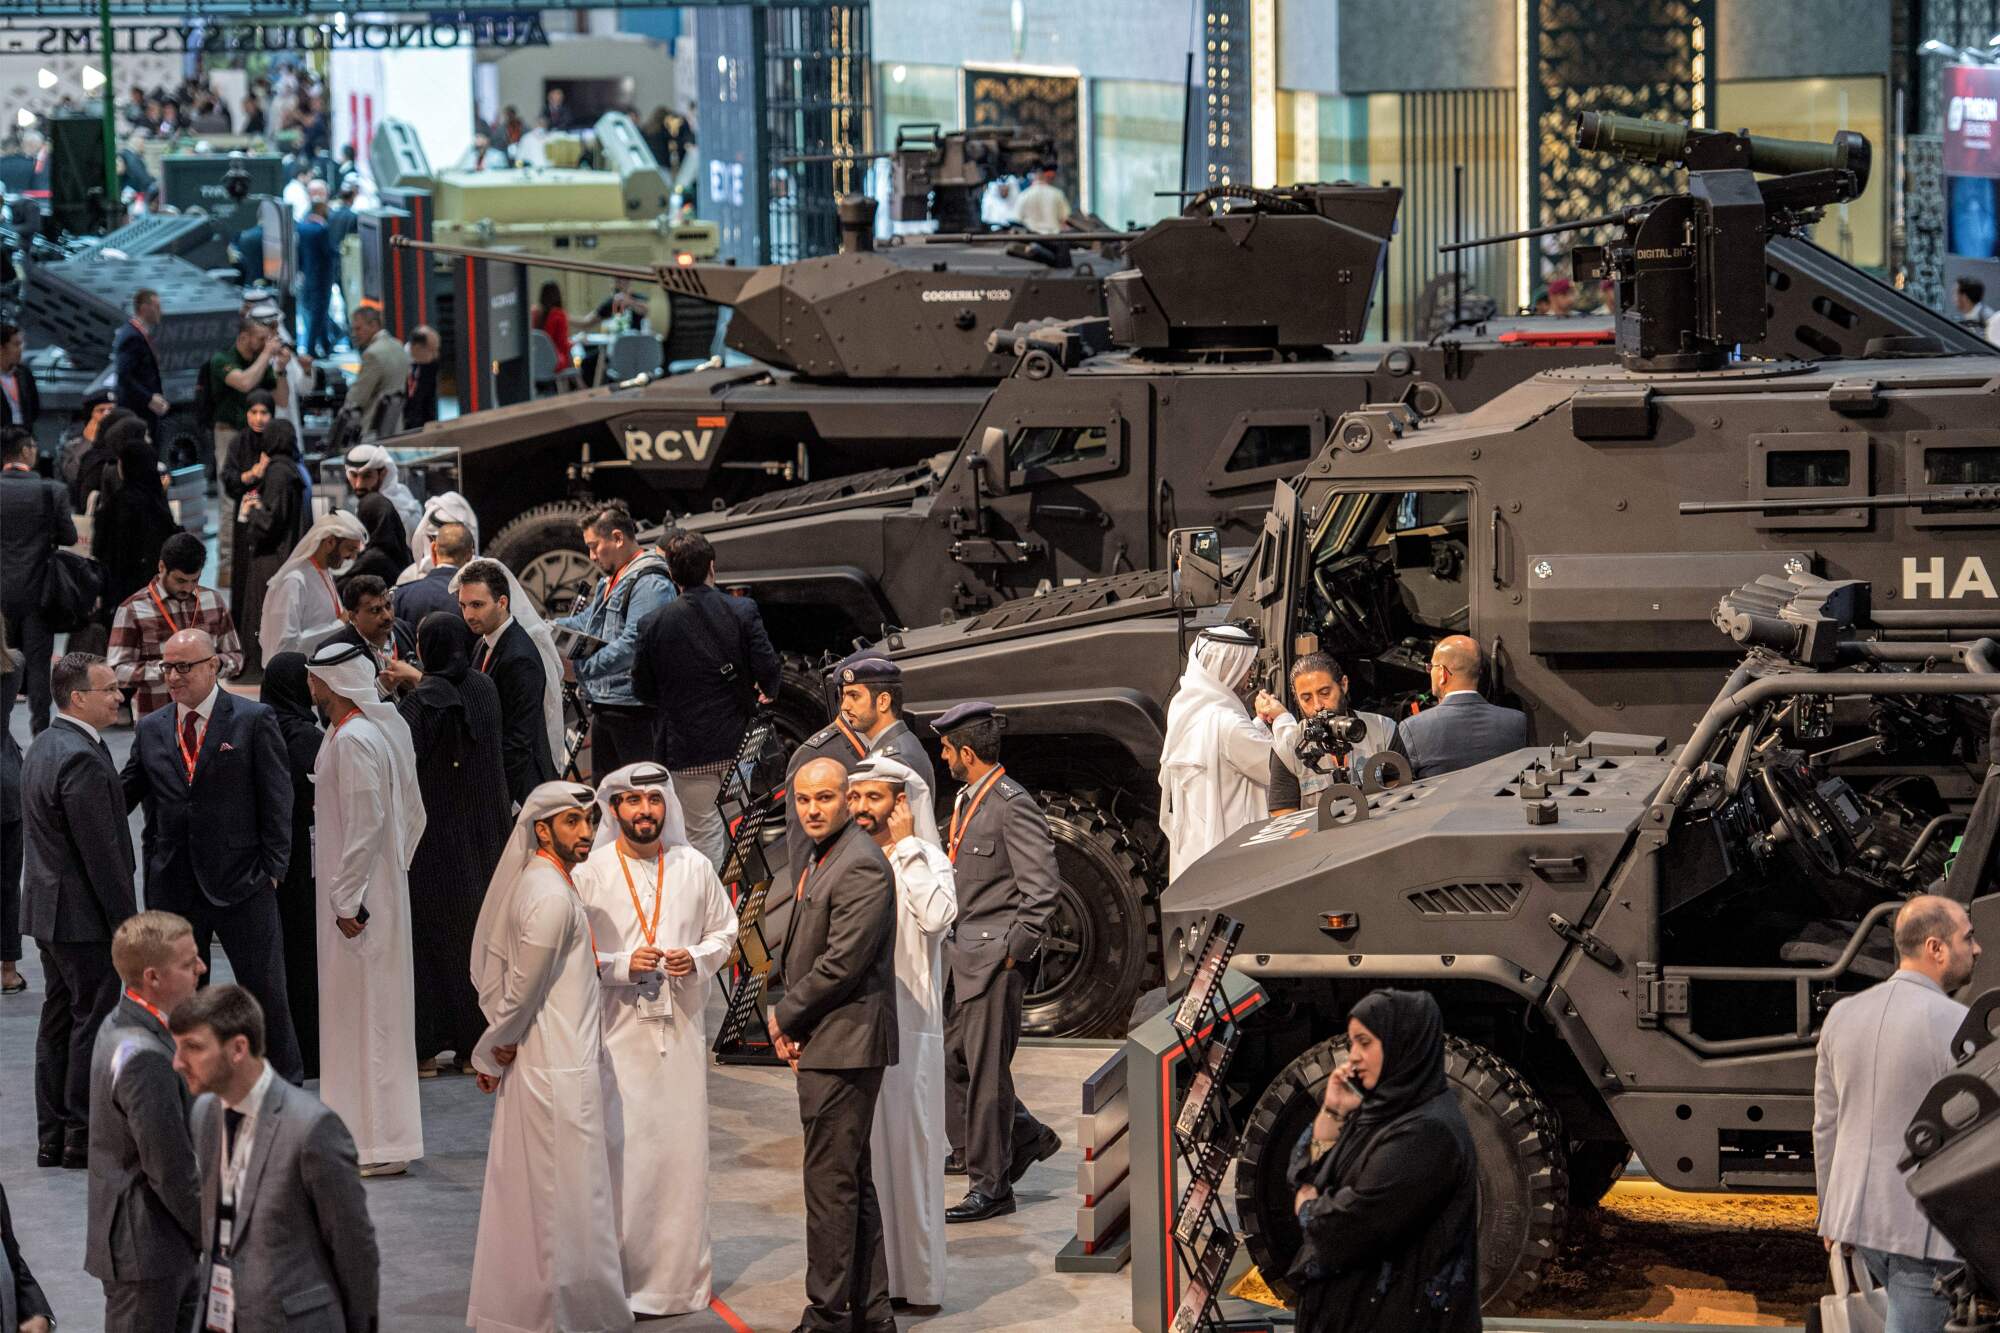 Visitors, some in suits and some in white robes with headdresses, check out brown-colored armored vehicles at weapons fair